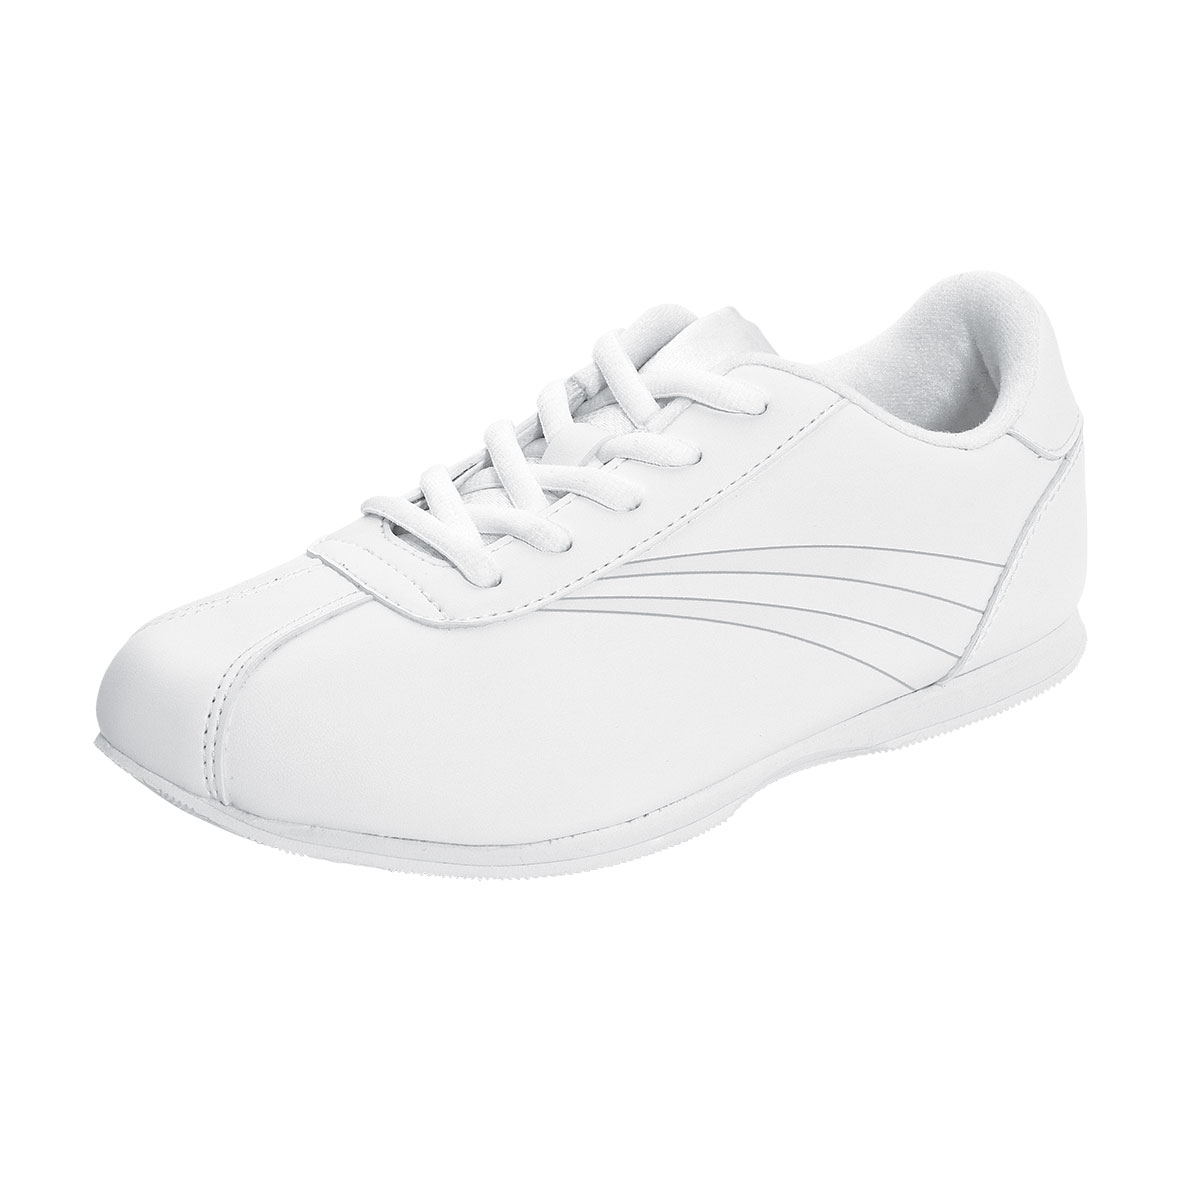 all white cheerleading shoes